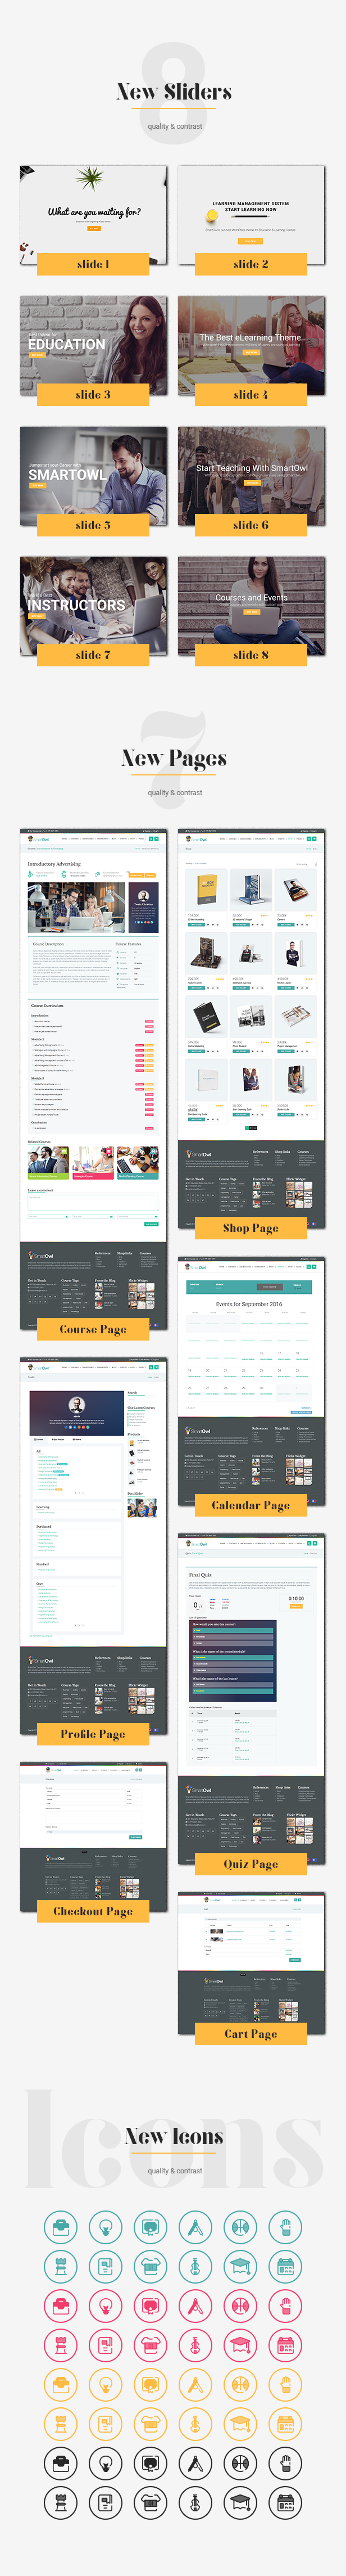 SmartOWL - Education Theme & Learning Management System for WordPress - 3